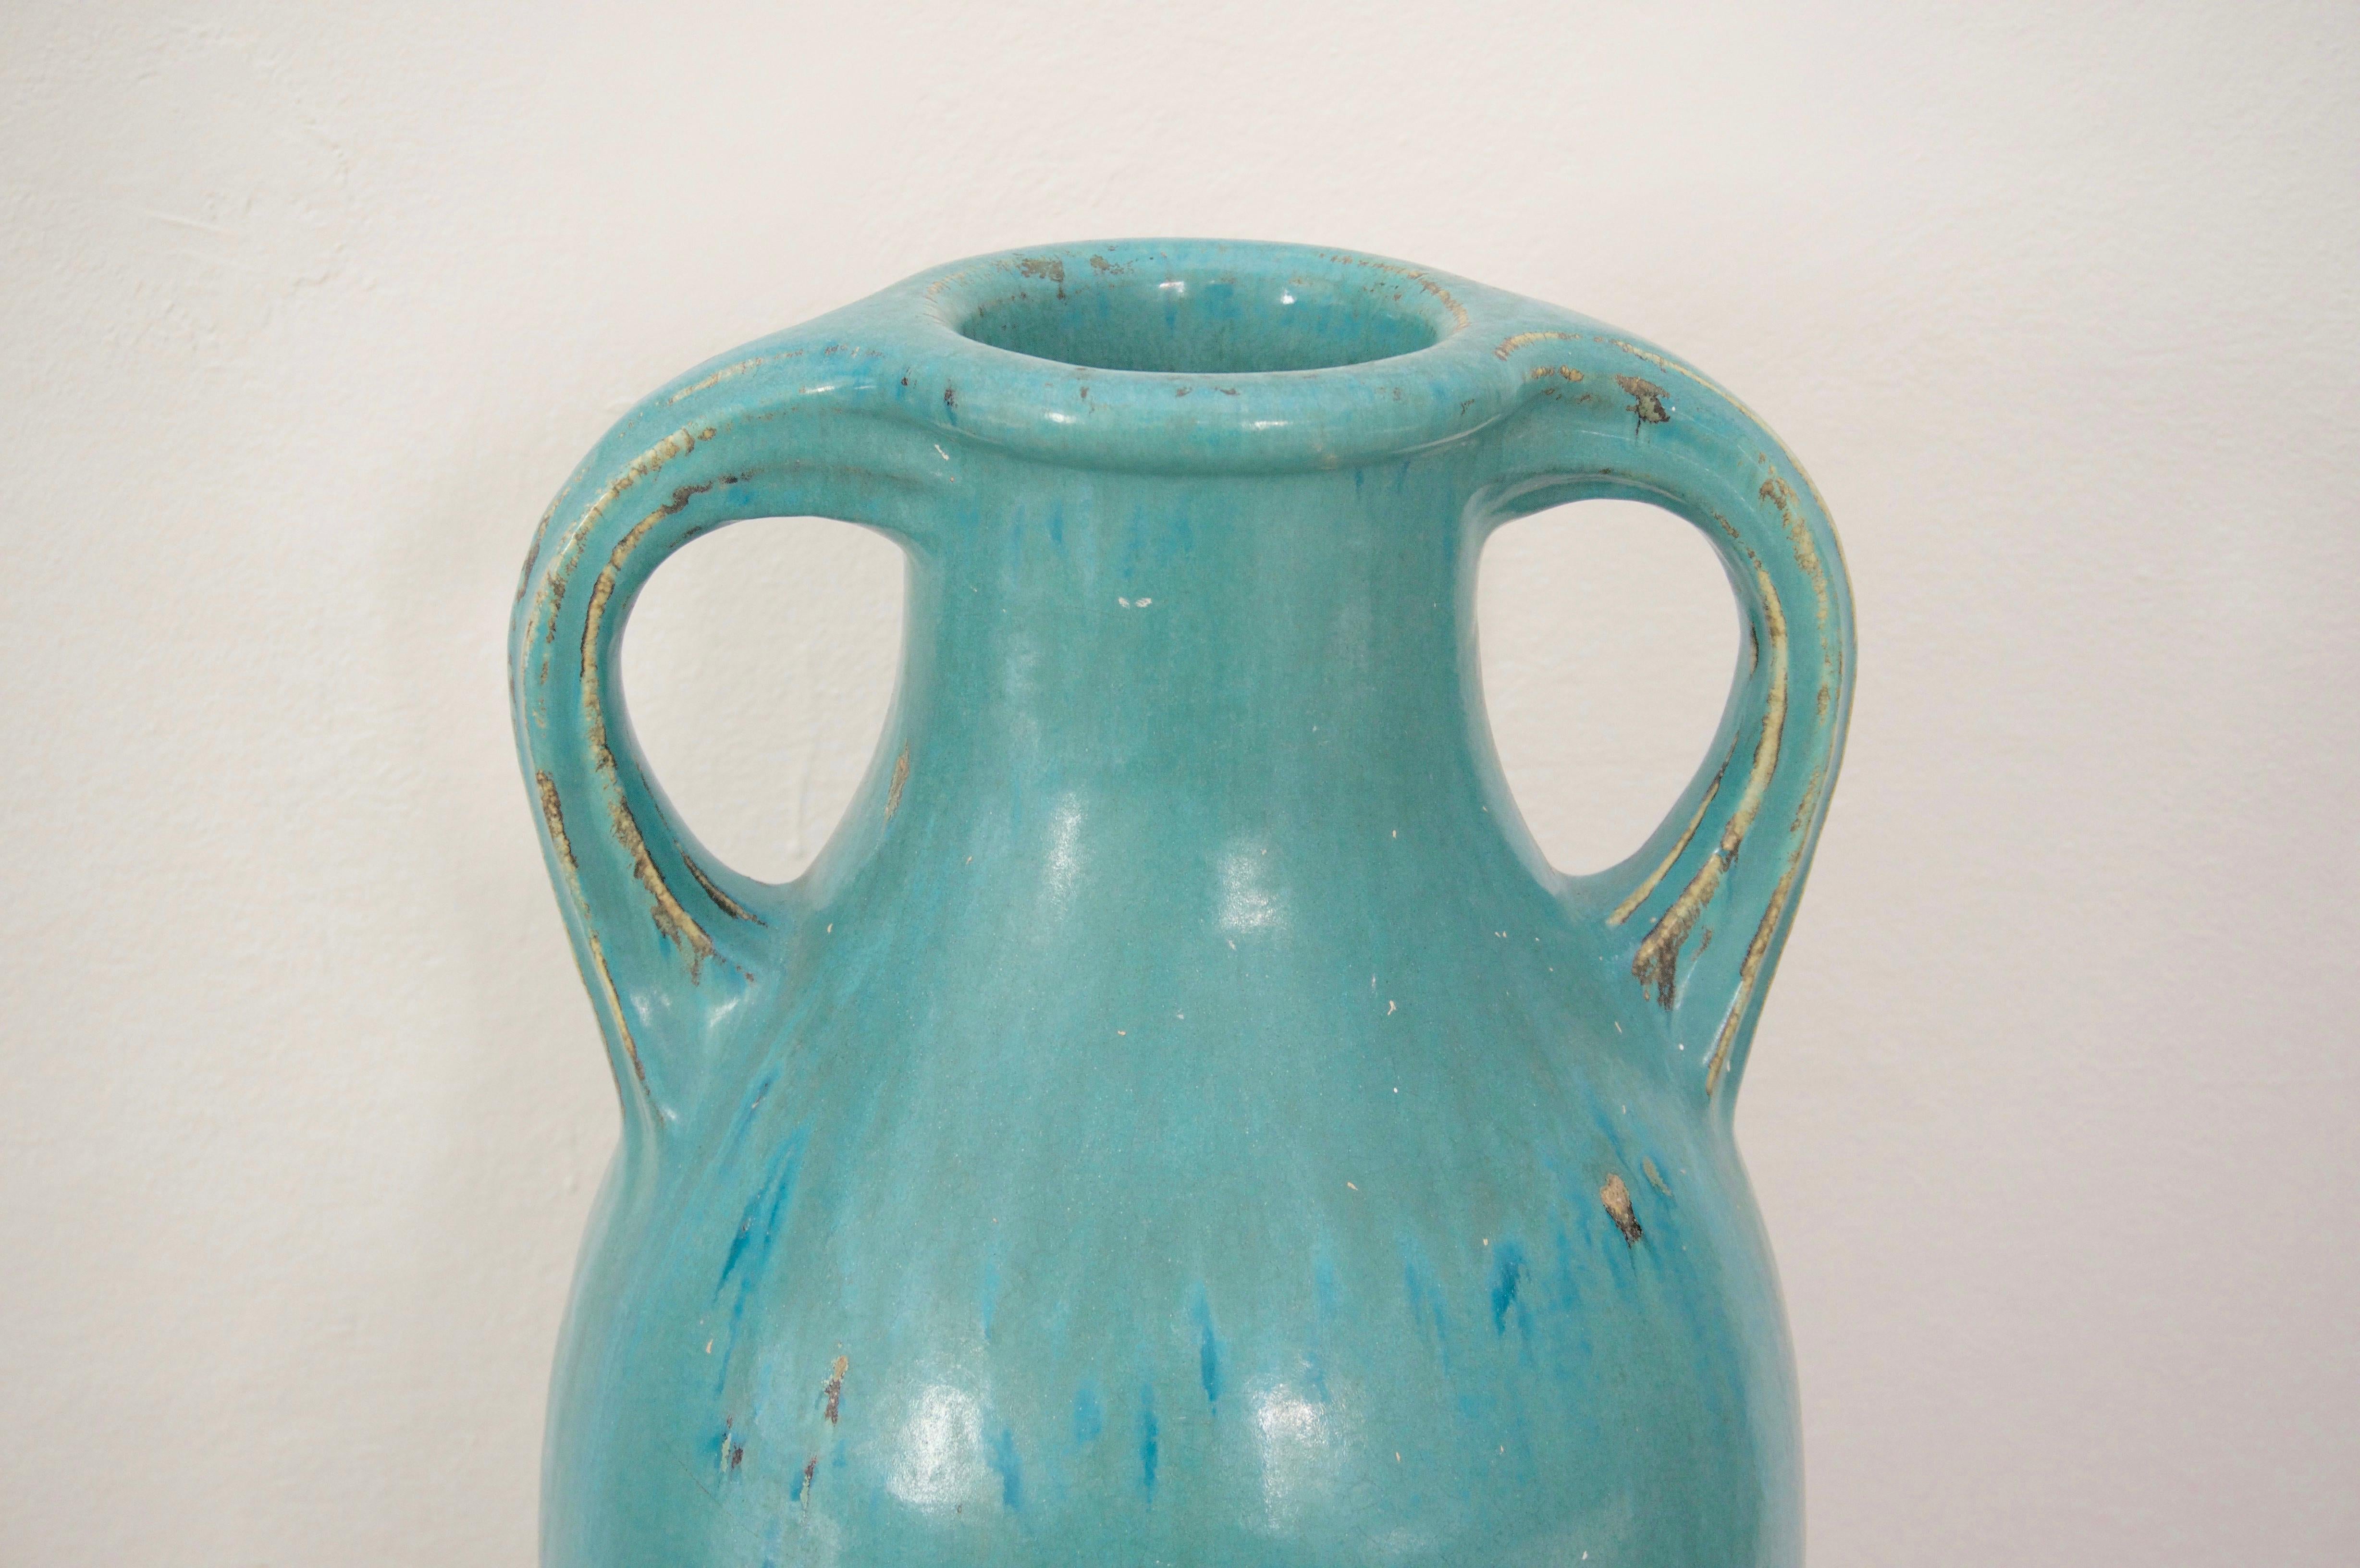 This stylish American Art Deco period Galloway Pottery urn was acquired from a Palm Beach estate and will make a great addition to your garden or perhaps logia. The turquoise glaze catches the light beautifully.